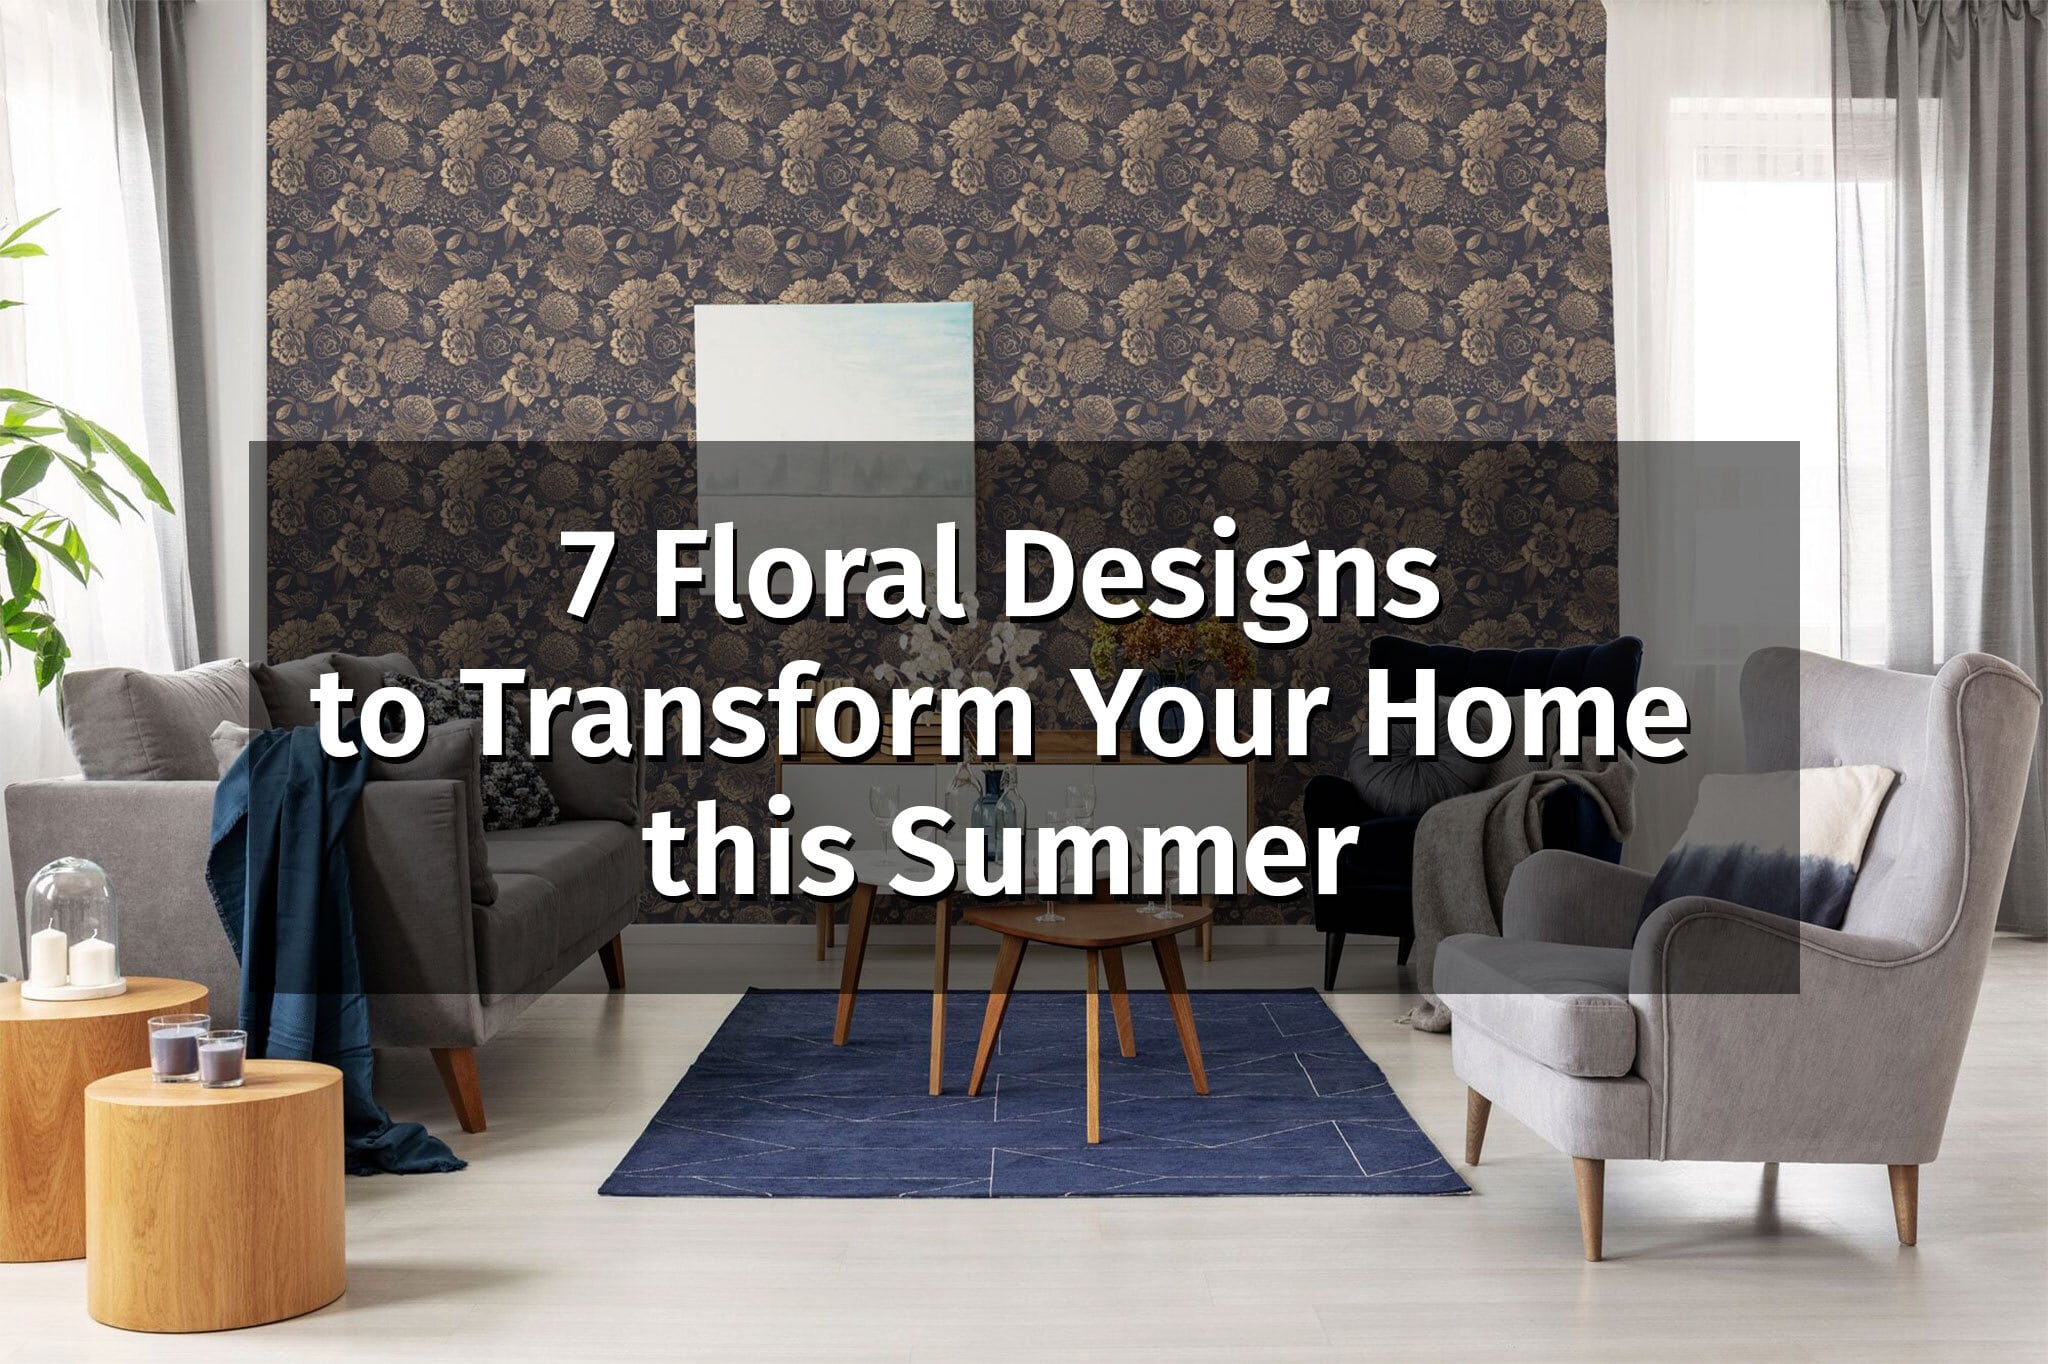 7 floral designs to transform your home this summer